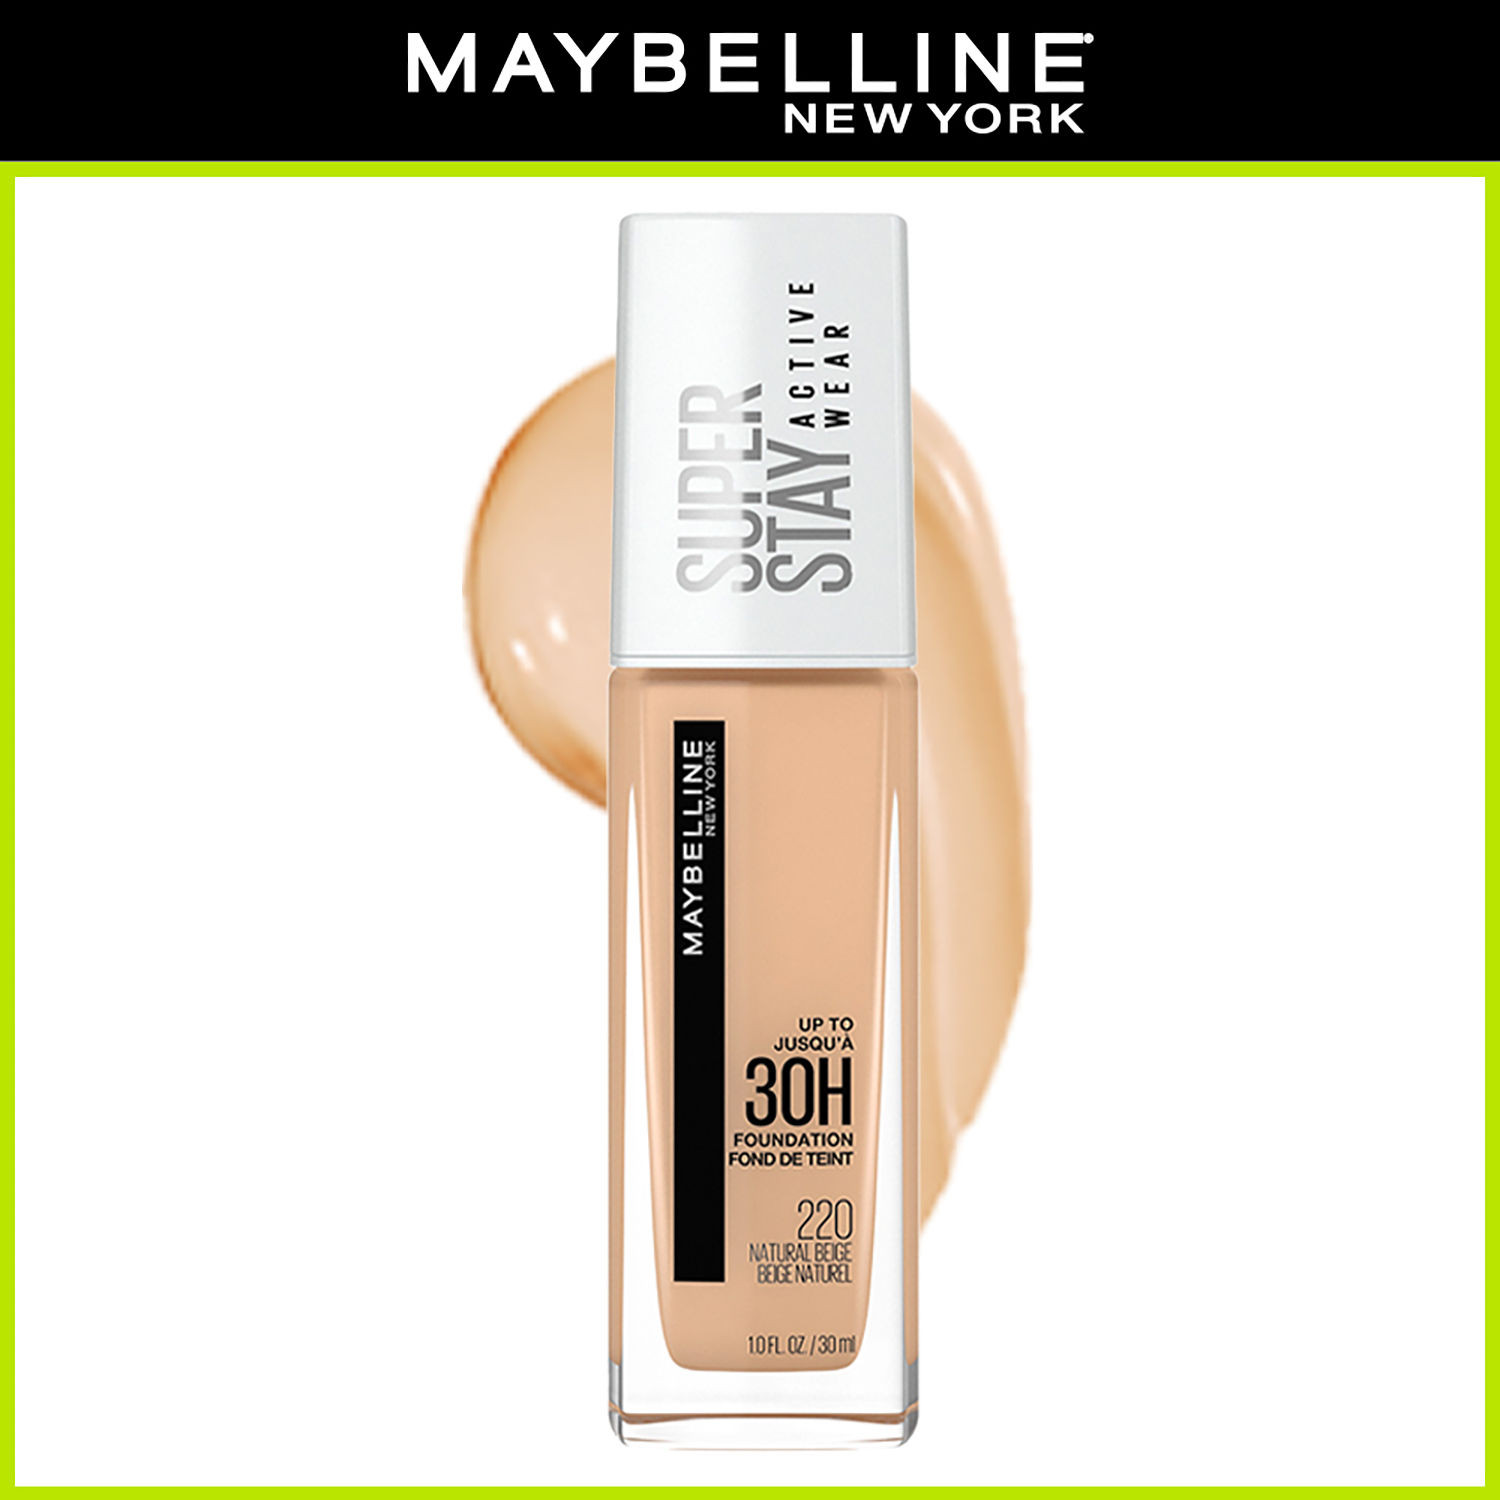 Wear, Proof with Coverage Transfer 220, Finish Liquid Beige, Super York HR Natural 30ml 30 Wear Full Stay New Matte Maybelline Active Foundation,